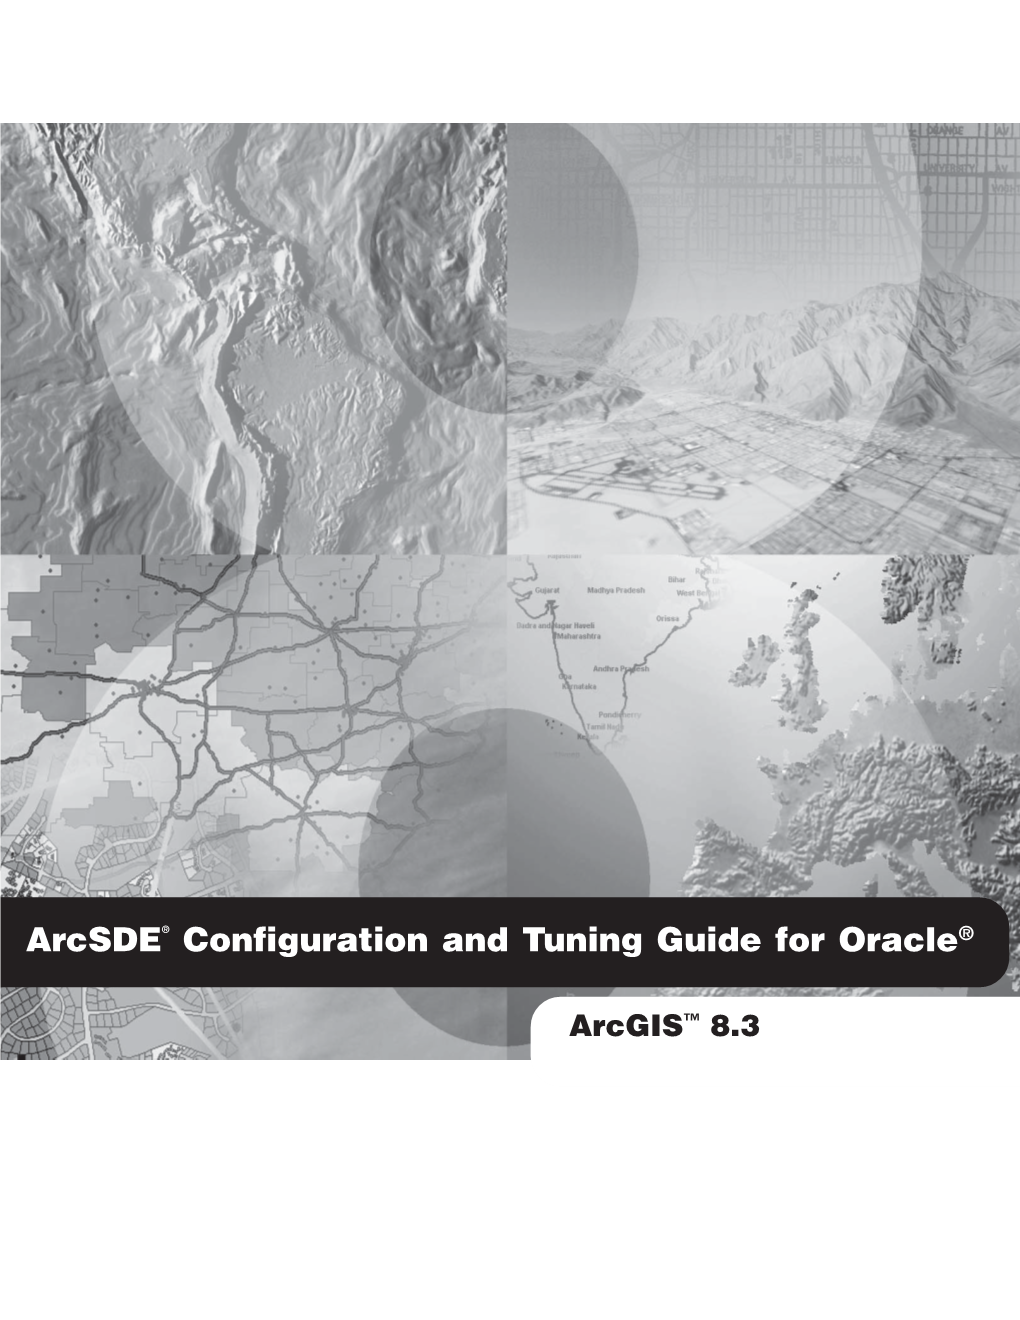 Arcsde Configuration and Tuning Guide for Oracle®